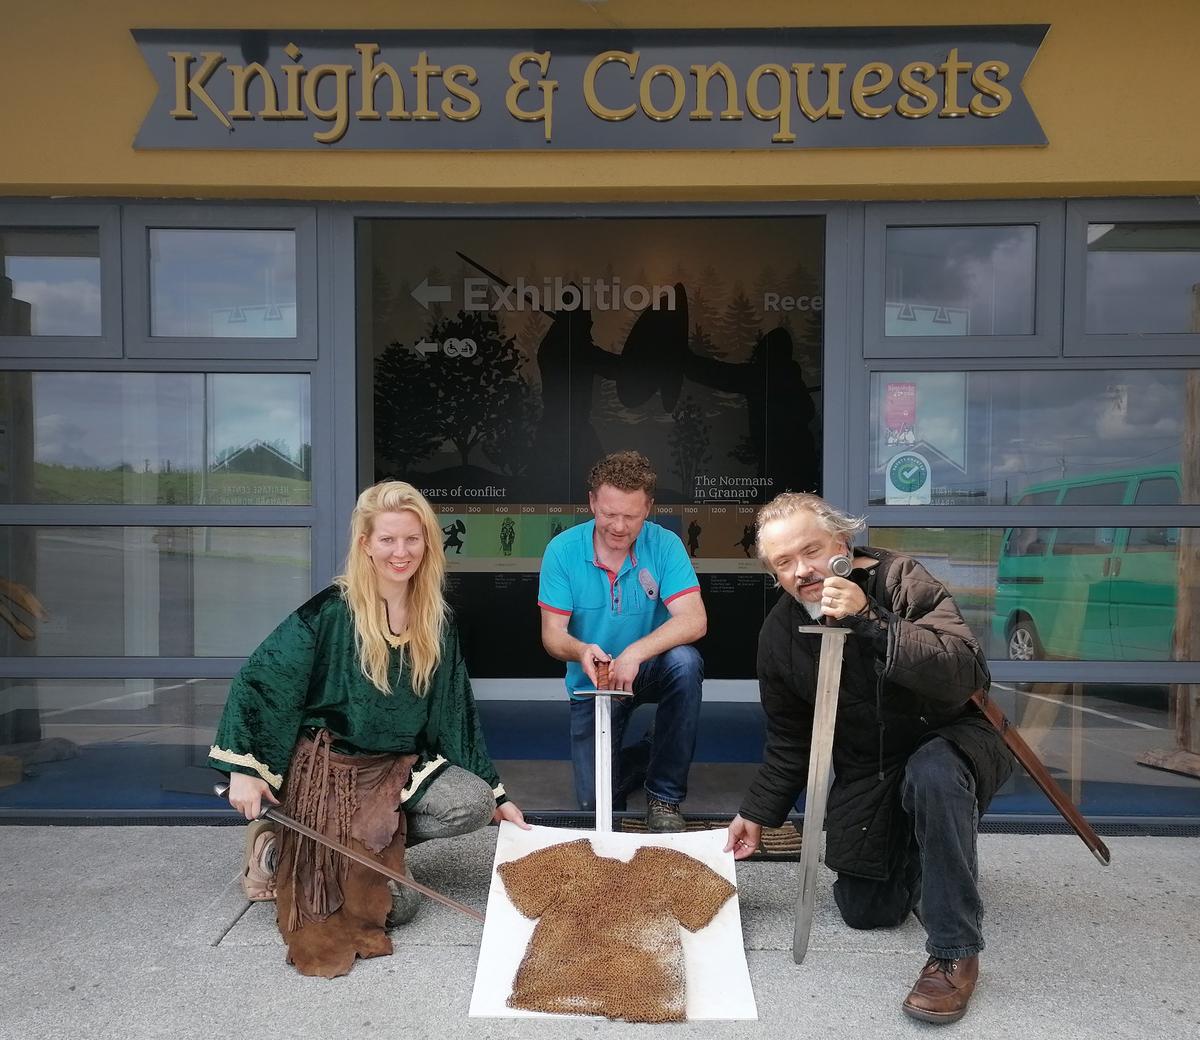 (Courtesy of <a href="https://www.facebook.com/KnightsConquests/">Granard Knights & Conquests</a>)